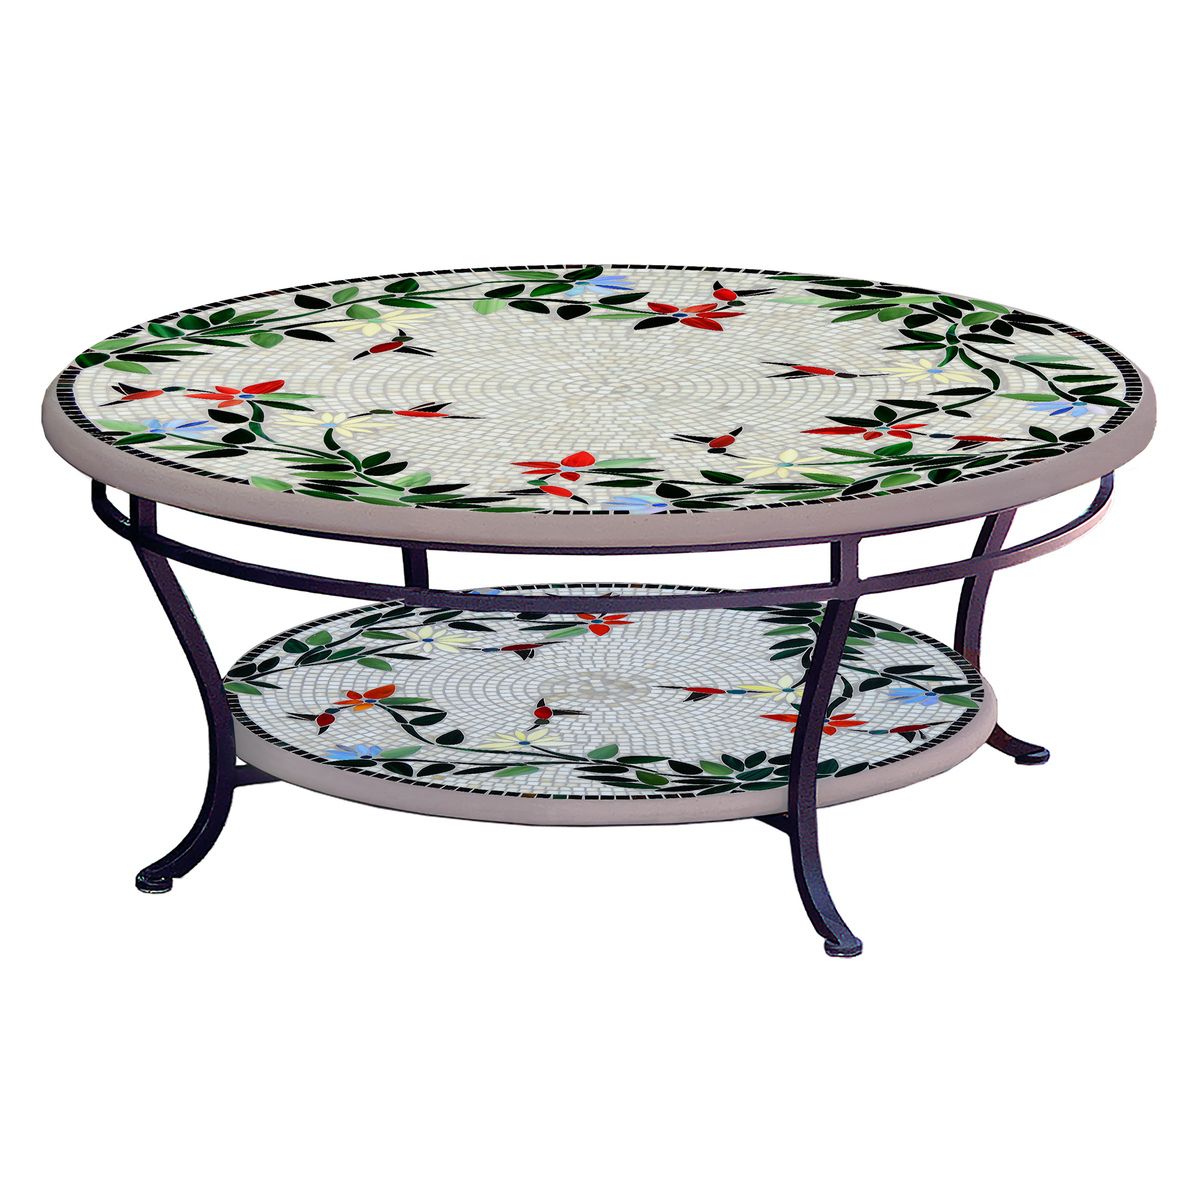 Hummingbird Mosaic Coffee Table - Tiered-Iron Accents